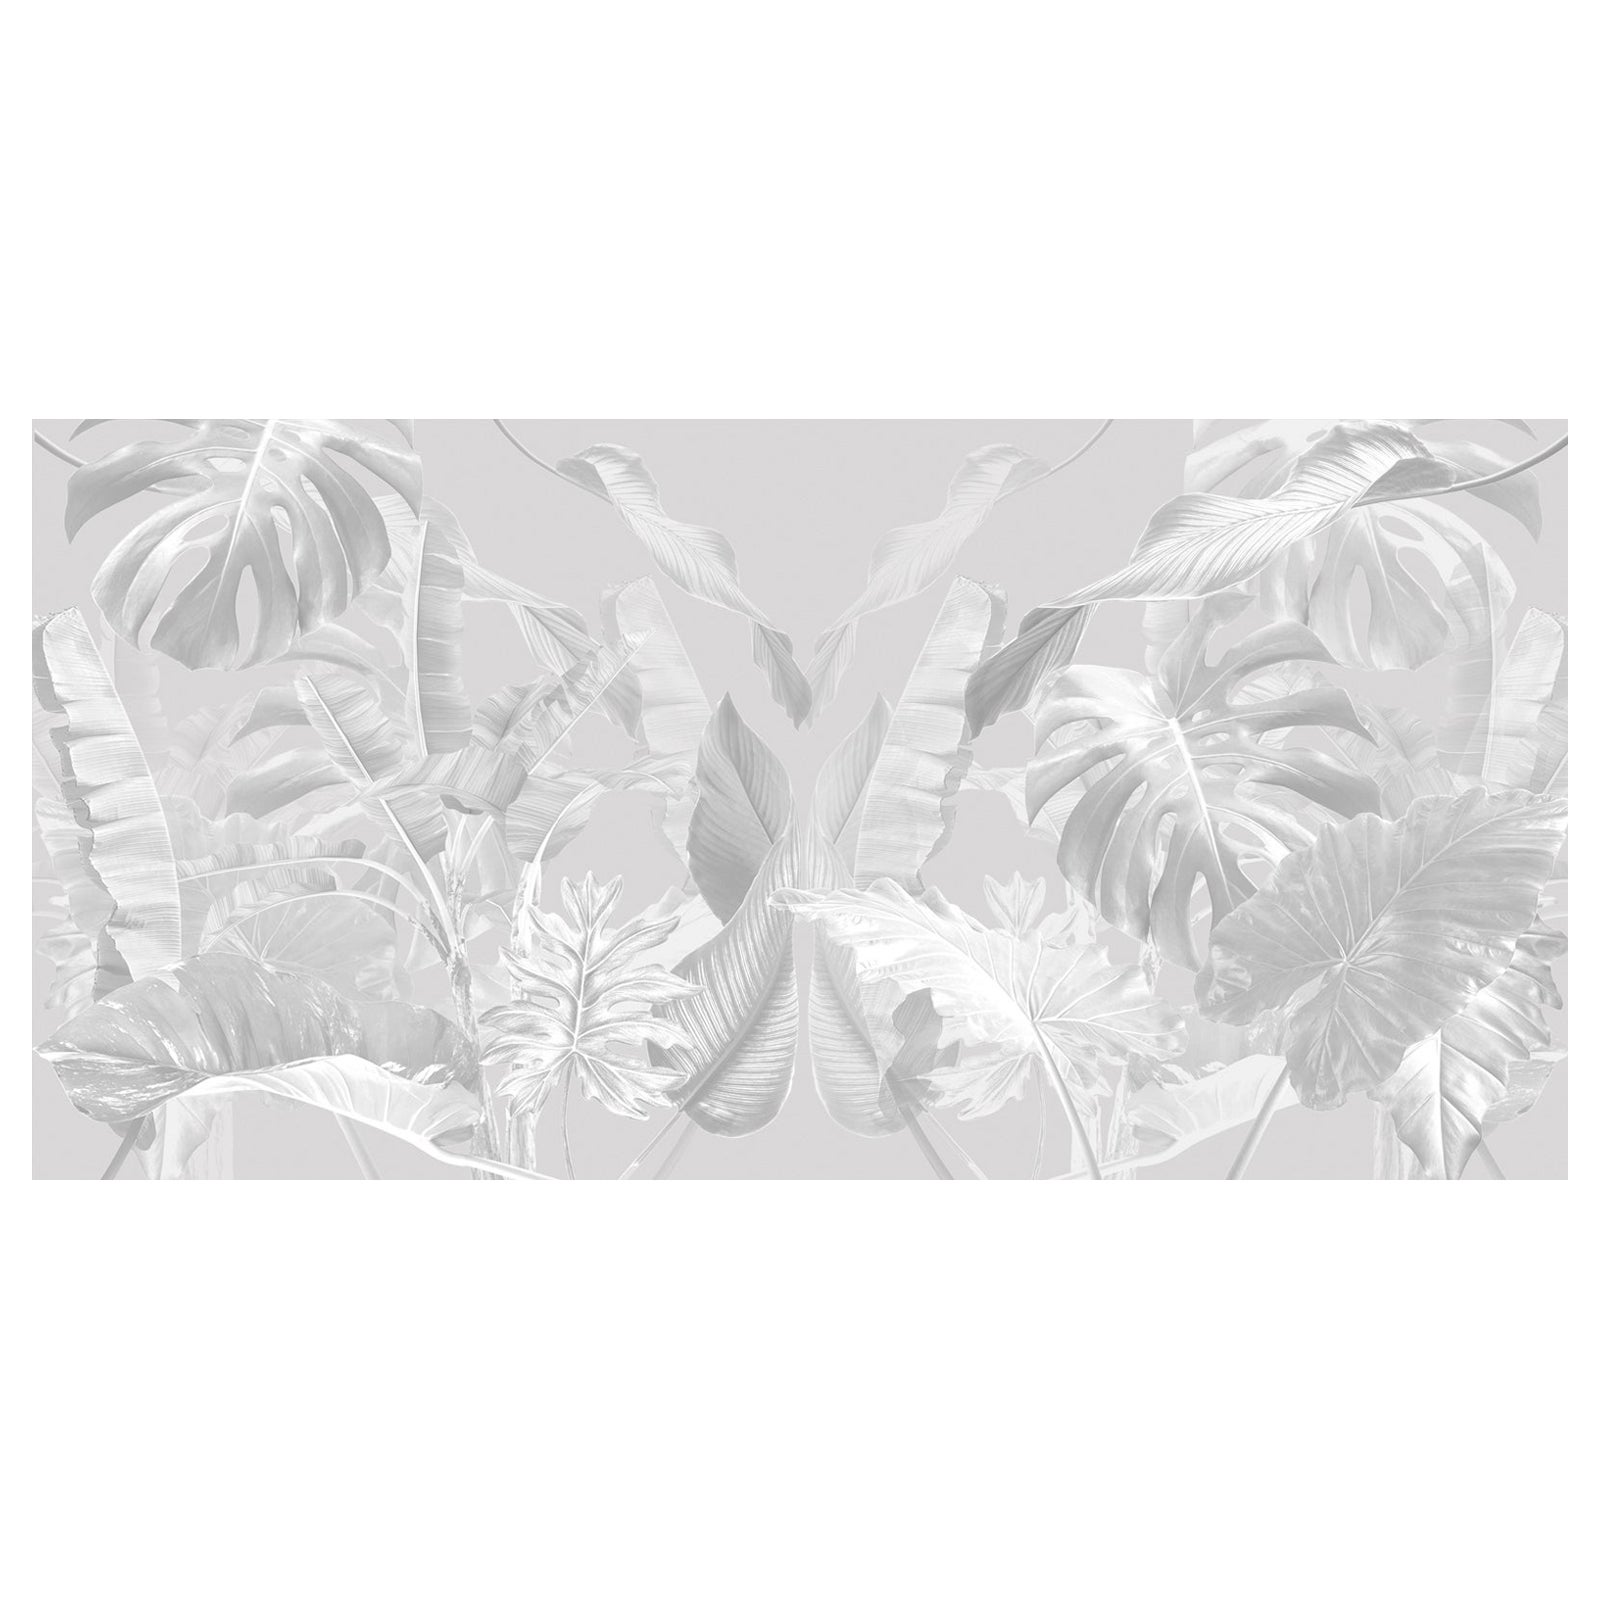 EDGE Collections JungleScape Silver; a whimsical nod to endless Summers For Sale